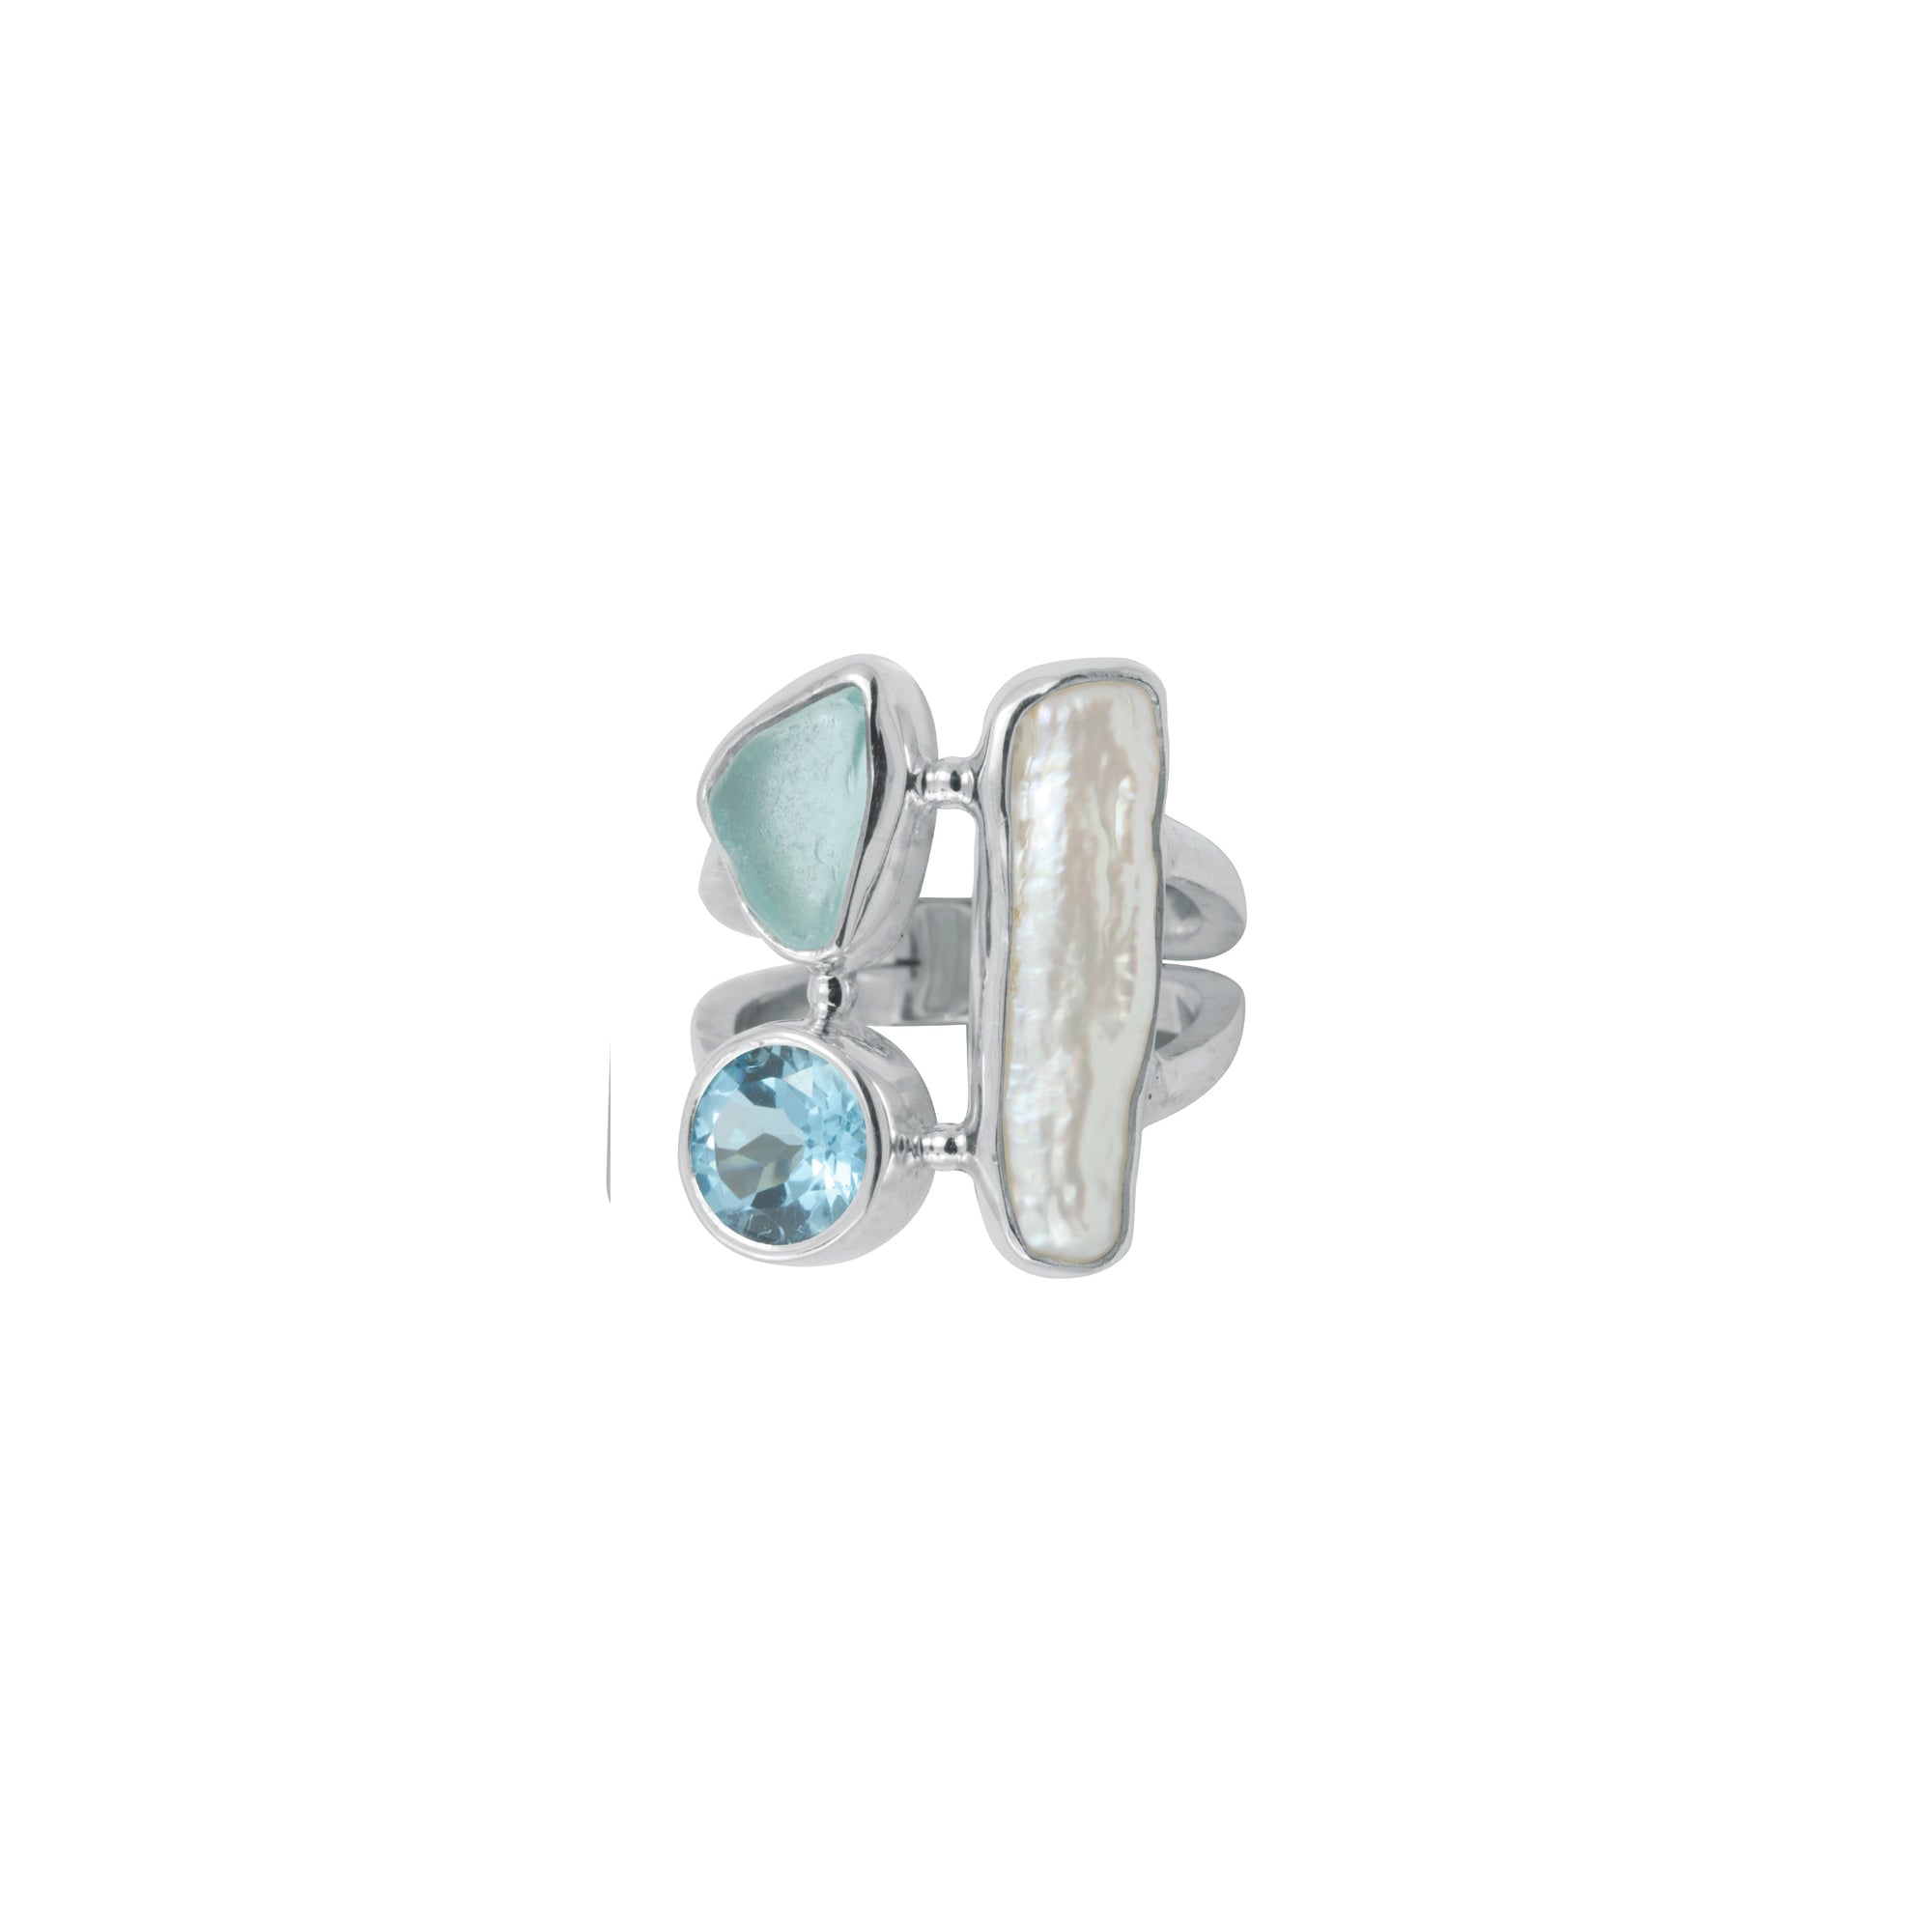 Stunning Sea glass Ring with Pearl and Blueb Topaz accents